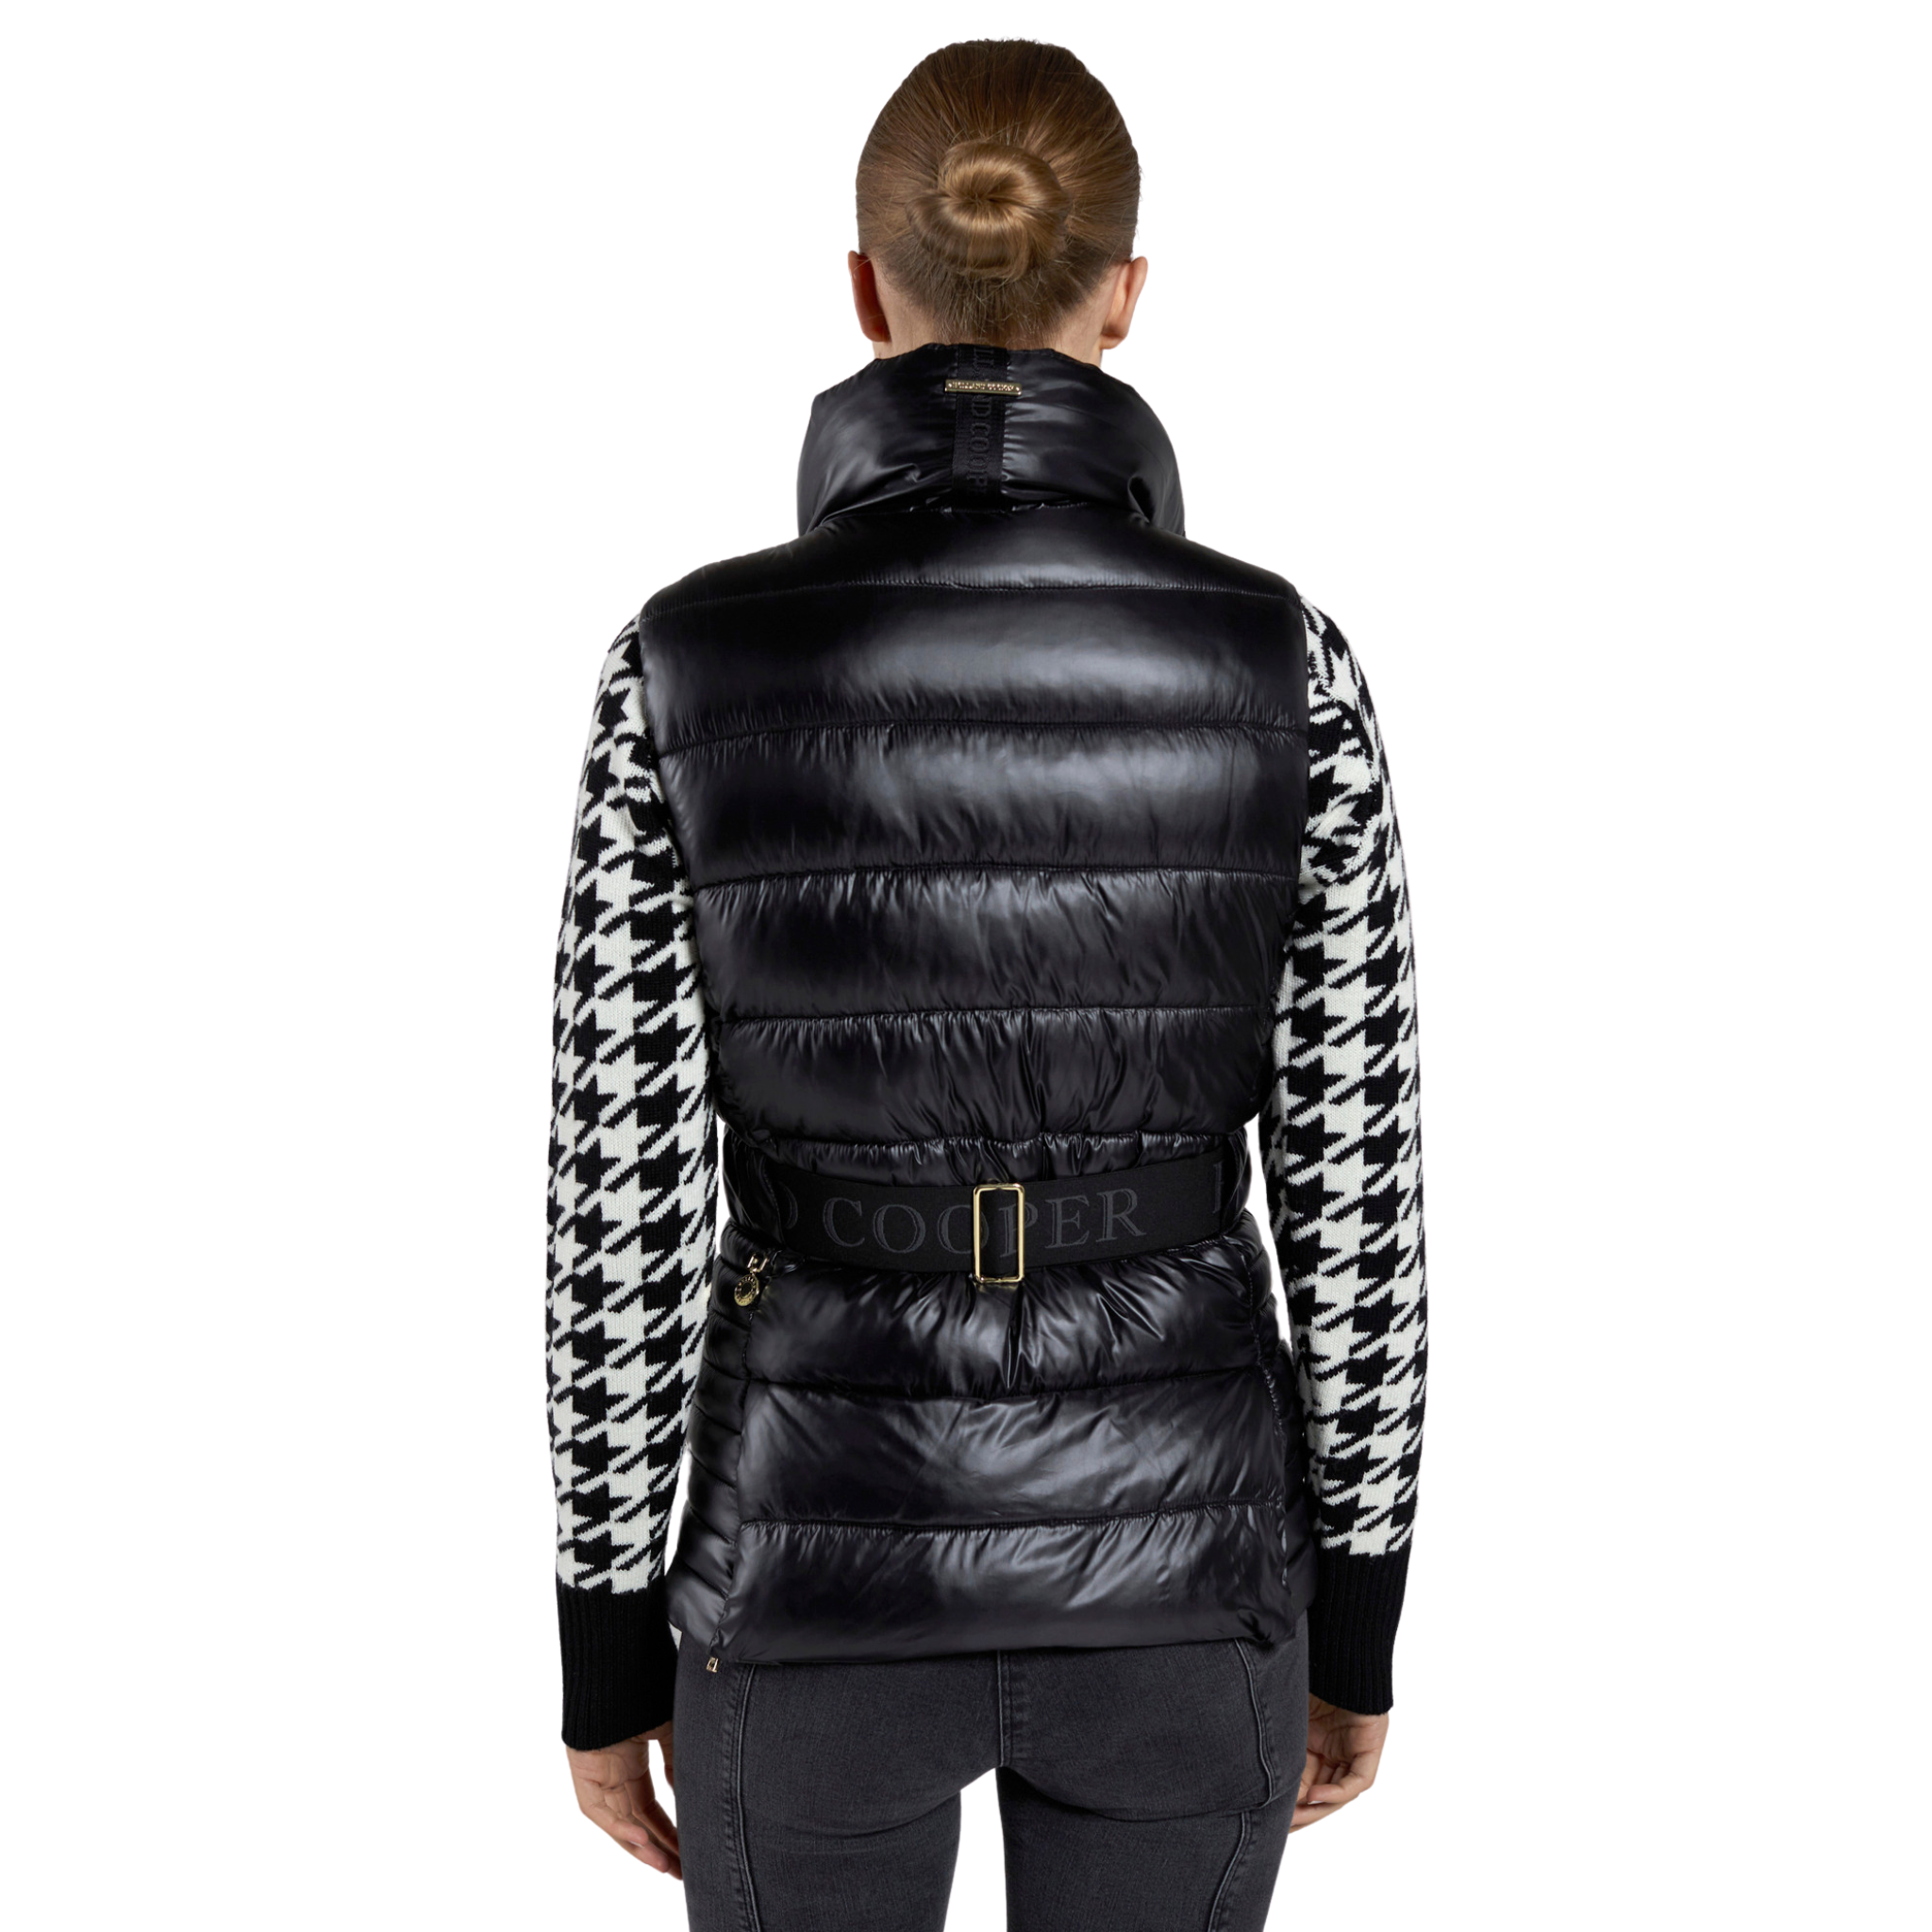 Valais Quilted Gilet Black